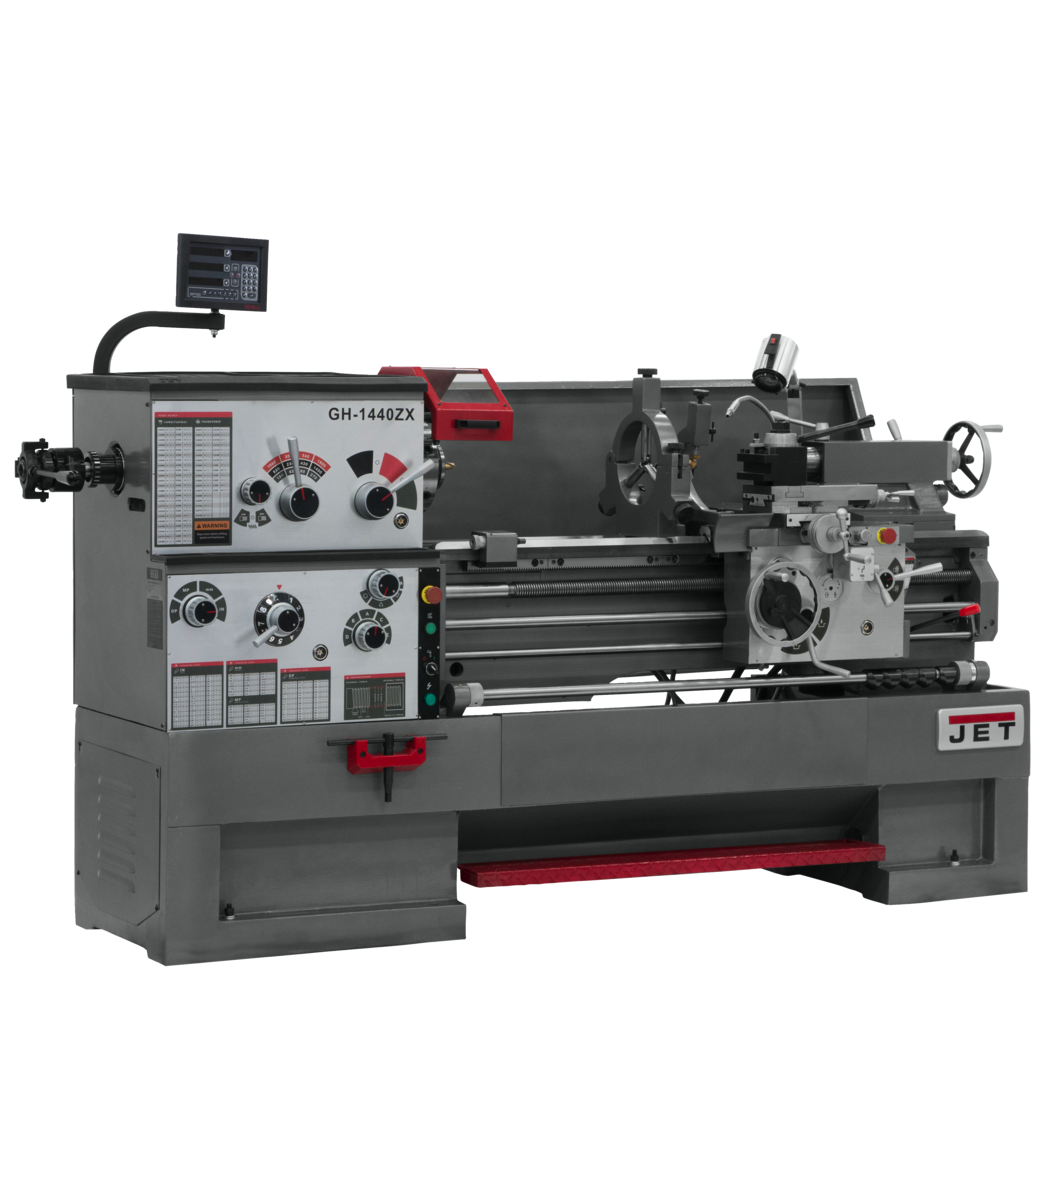 321498, GH-1440ZX Lathe with NE DP700L DRO 2 AX With TAK&CLLT, Jet, Metalworking, Turning, Lathes